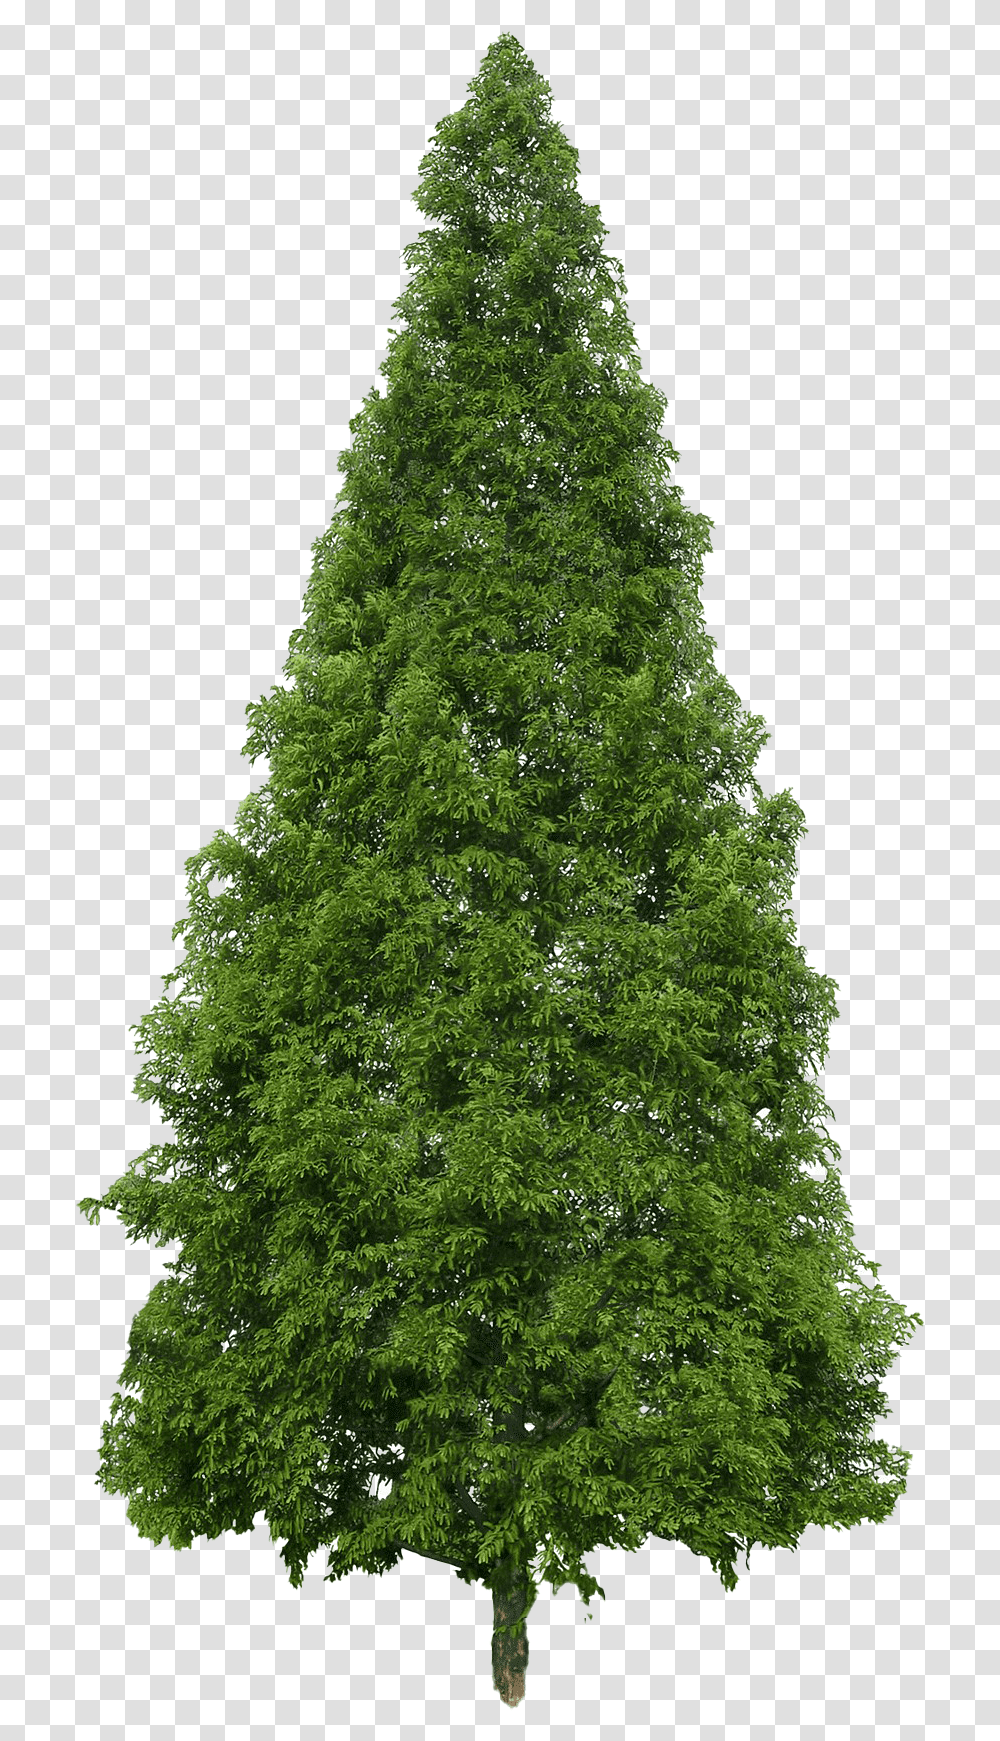 Evergreen Image Evergreen Tree, Plant, Christmas Tree, Ornament, Maple Transparent Png